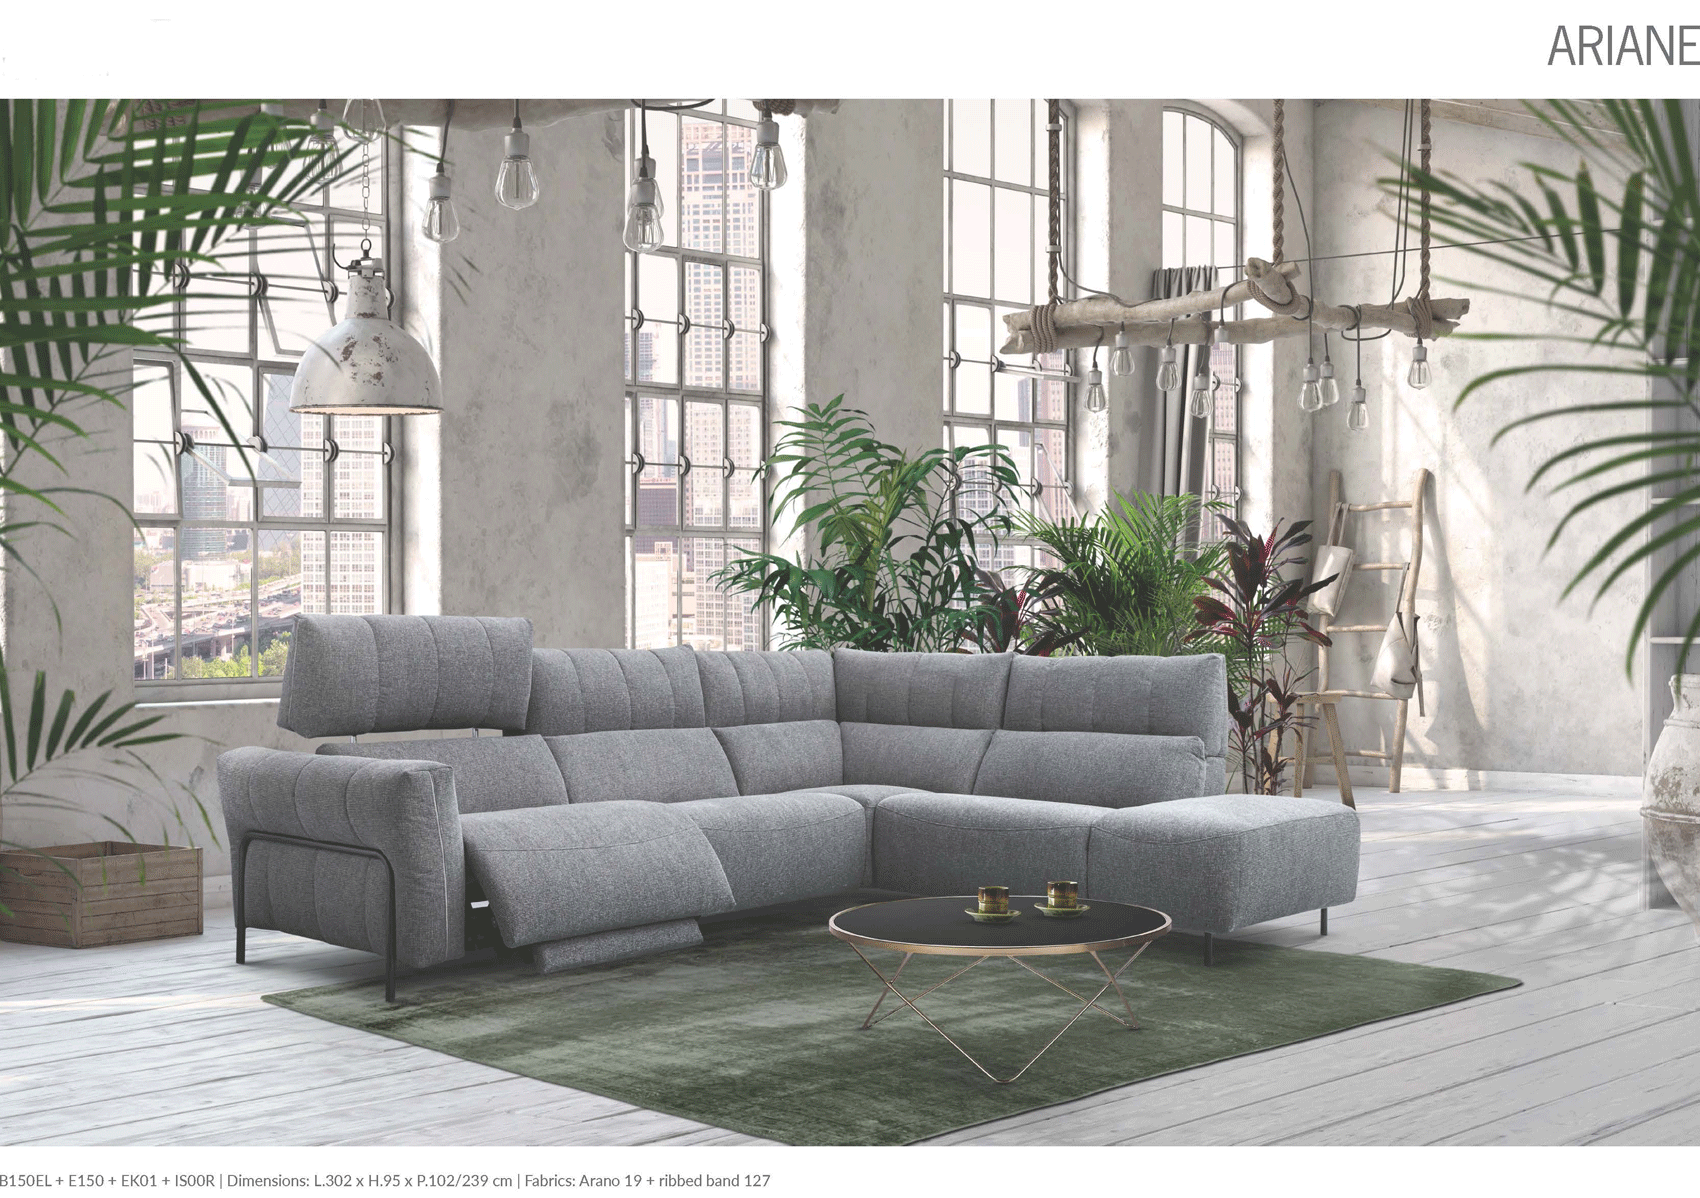 Brands Status Modern Collections, Italy Ariane Sectional